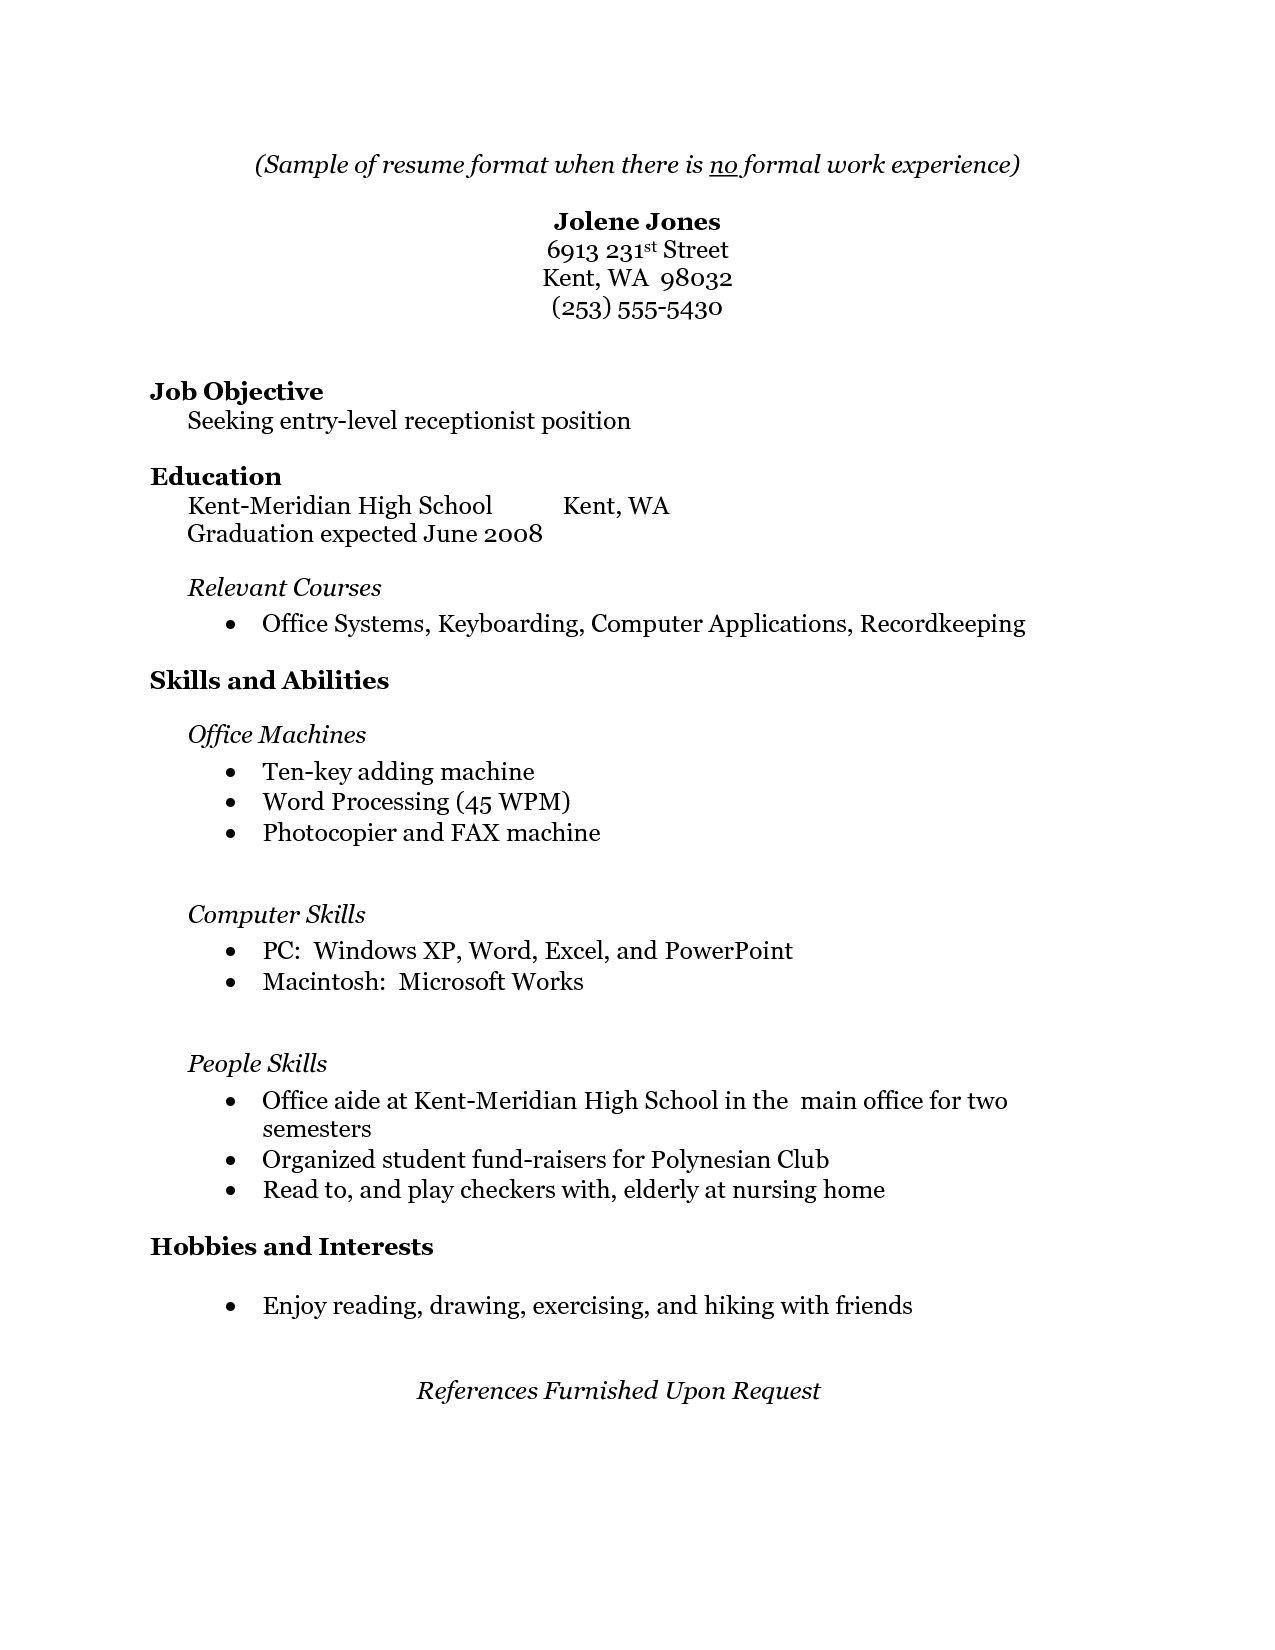 Sample Resume for High School Student No Experience Free Resume Templates No Work Experience #experience …